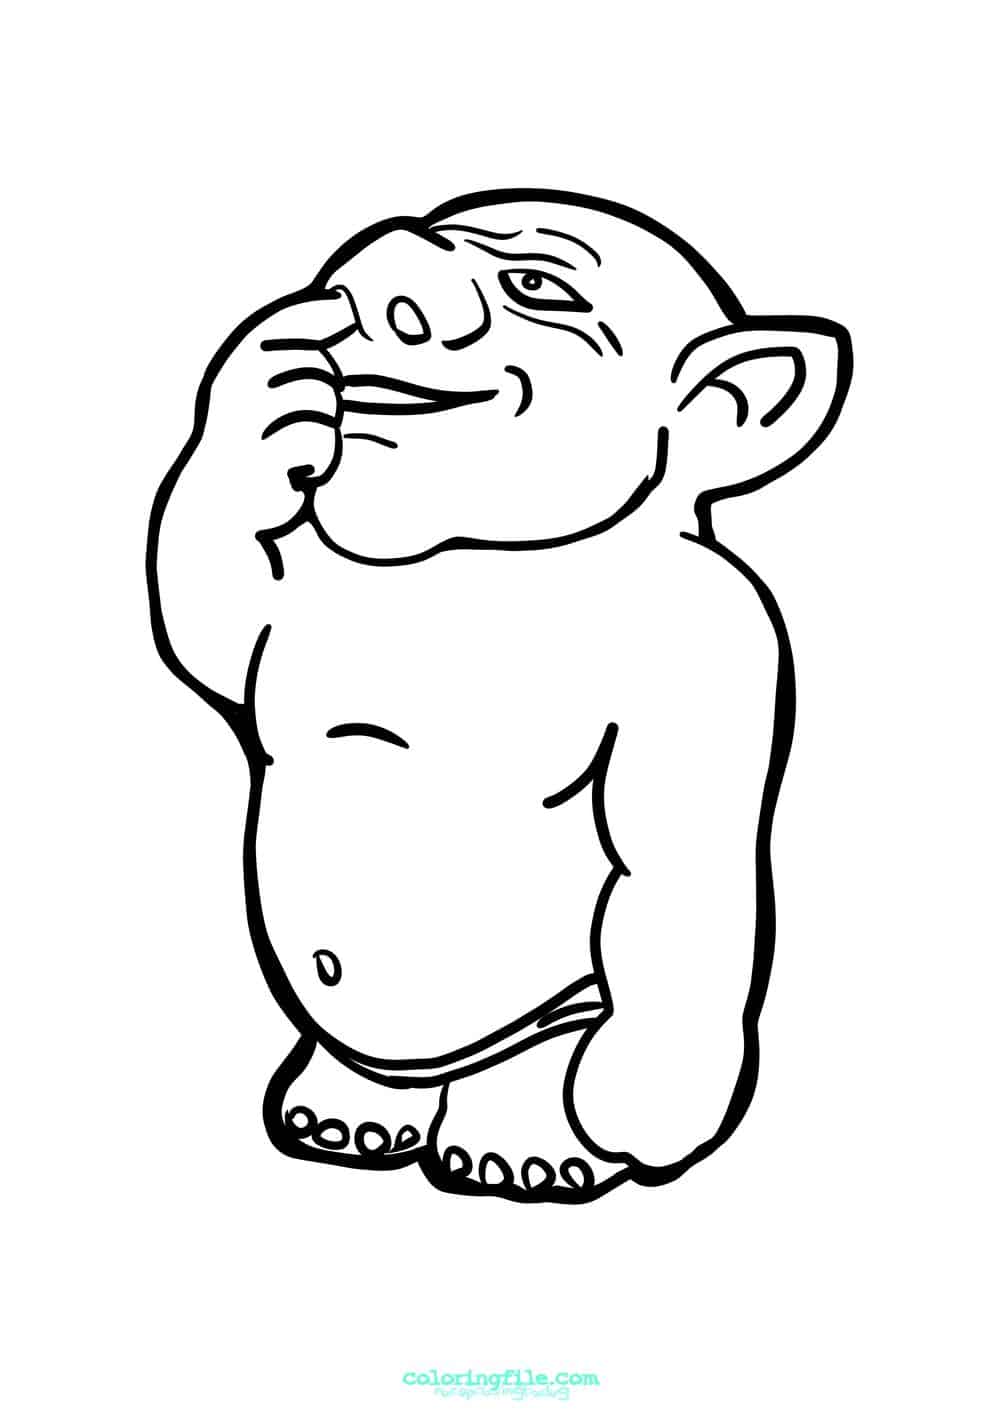 Funny troll halloween coloring pages